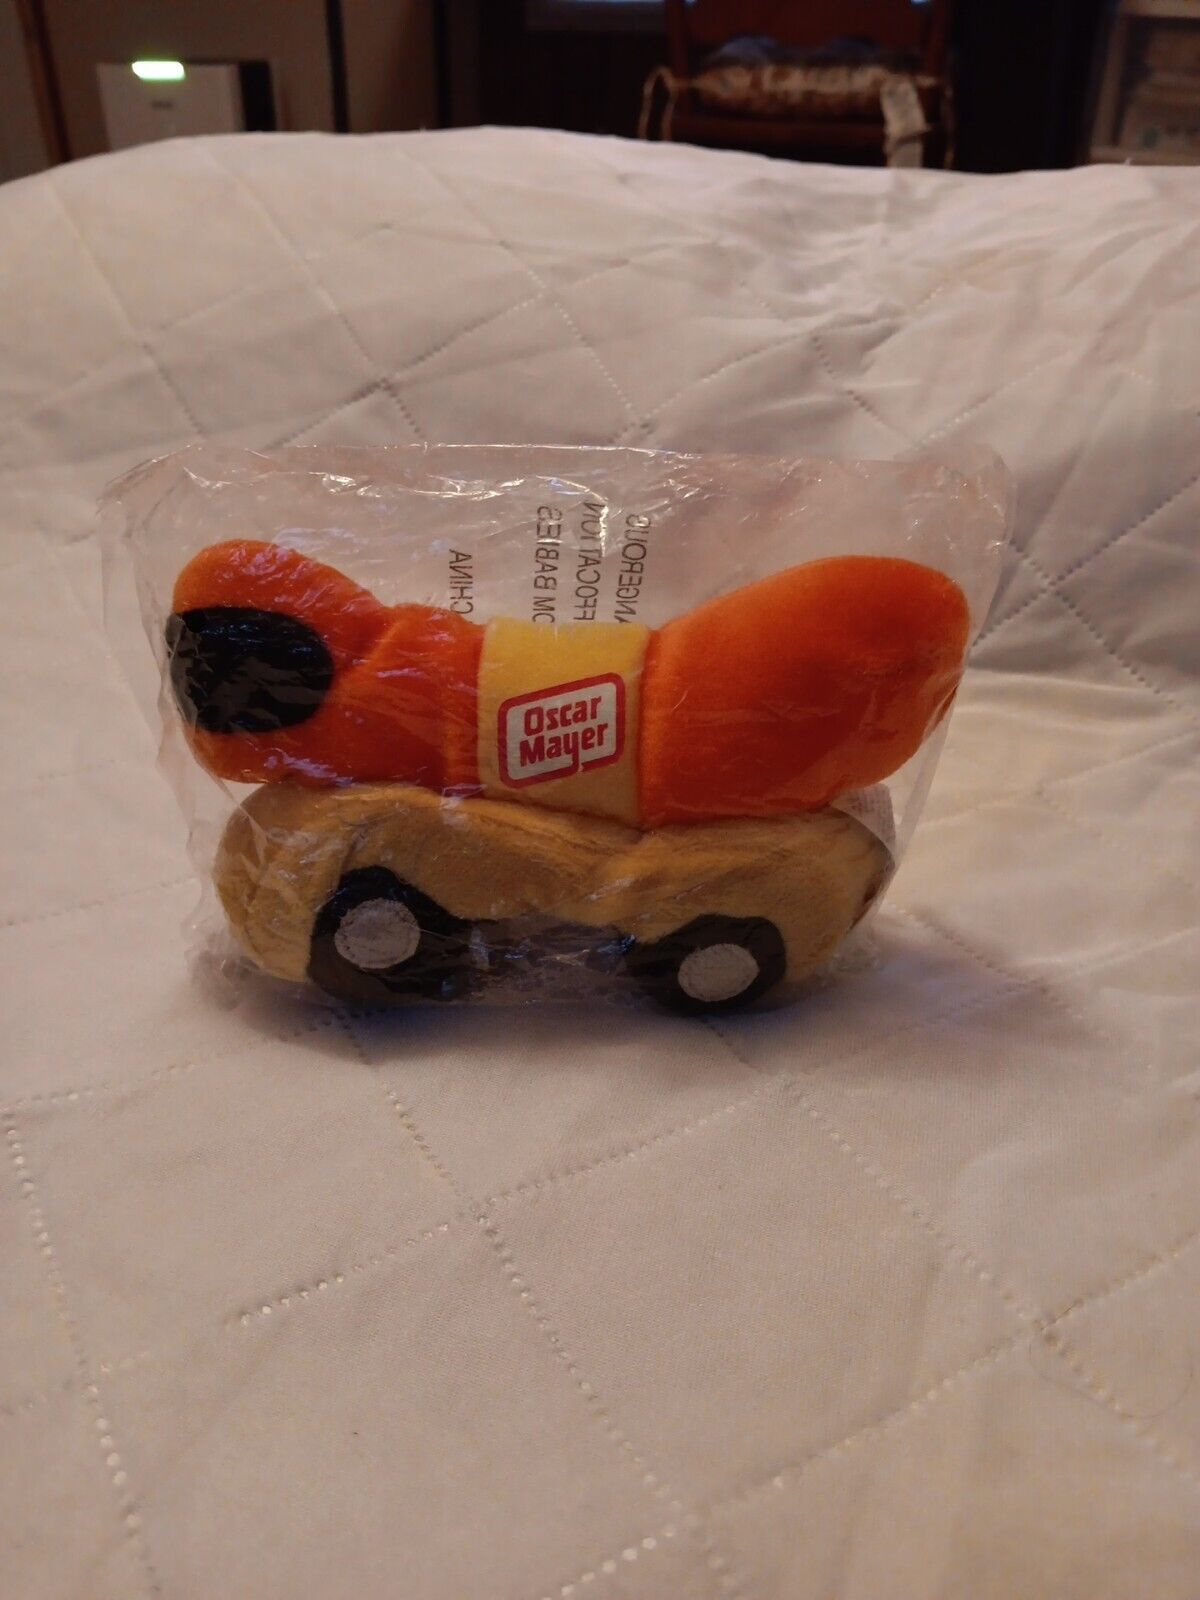 NEW Vintage Oscar Mayer Meyer Wiener Mobile Beanbag Plush Toy Just Whistle